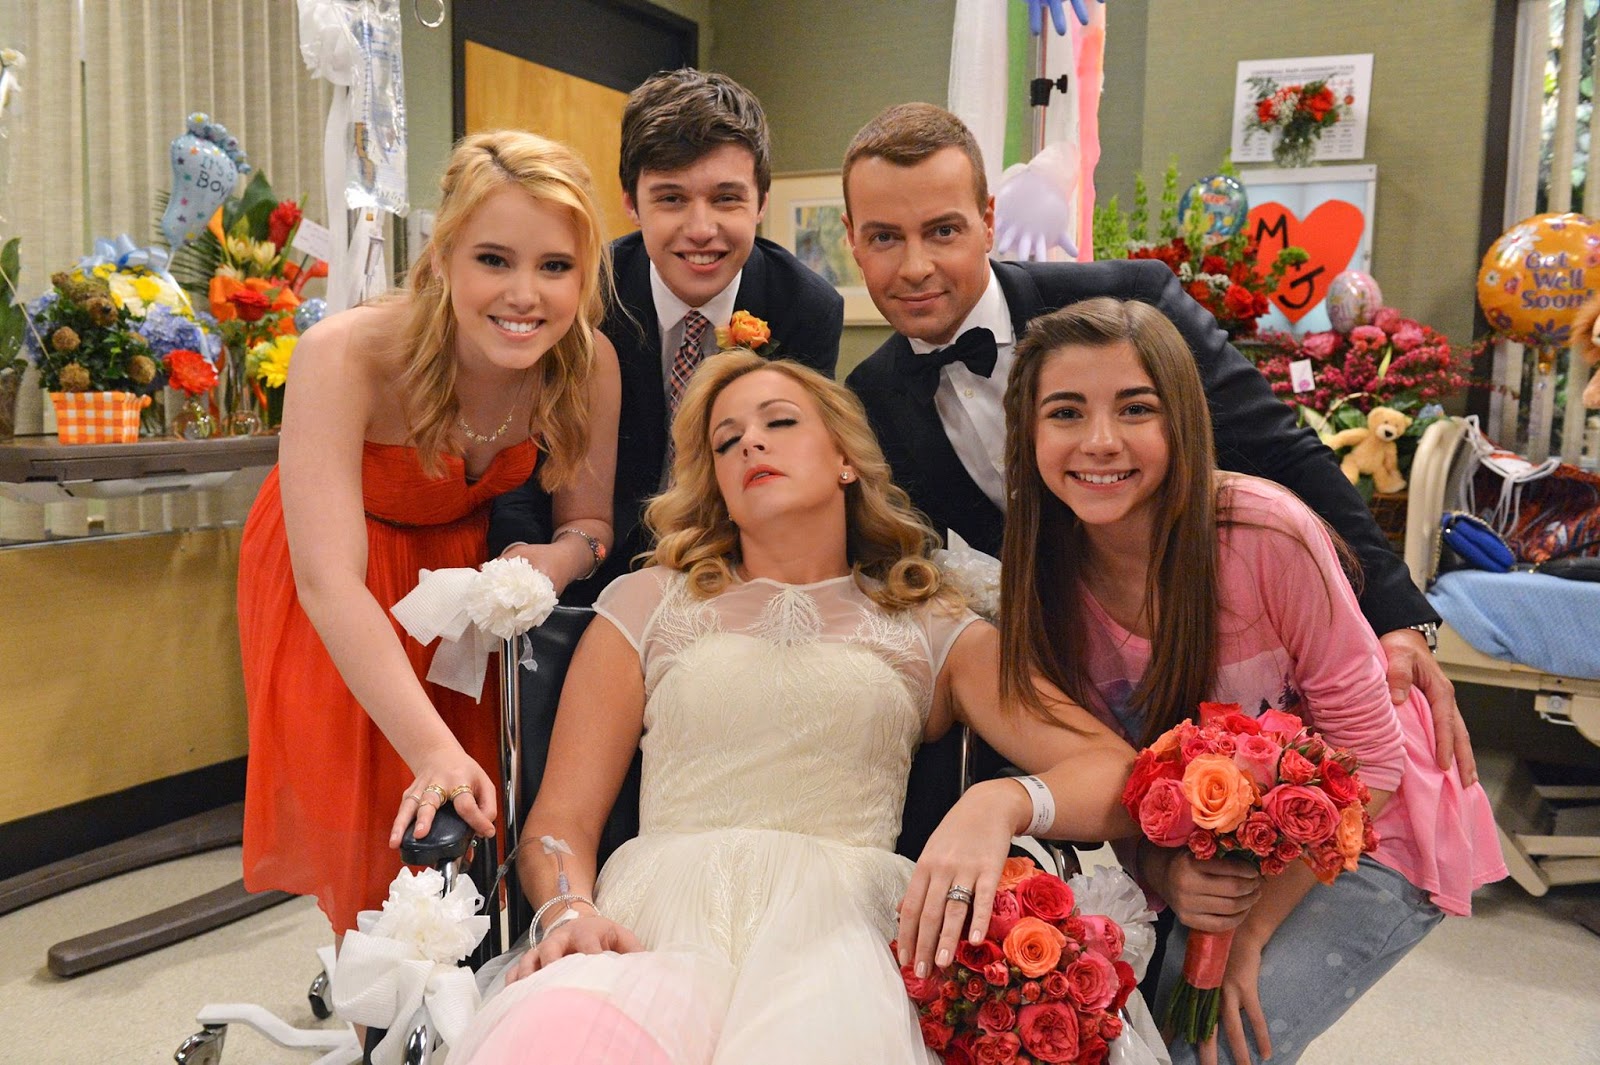 The Talking Box Season Finale Melissa And Joey Married With Another Child